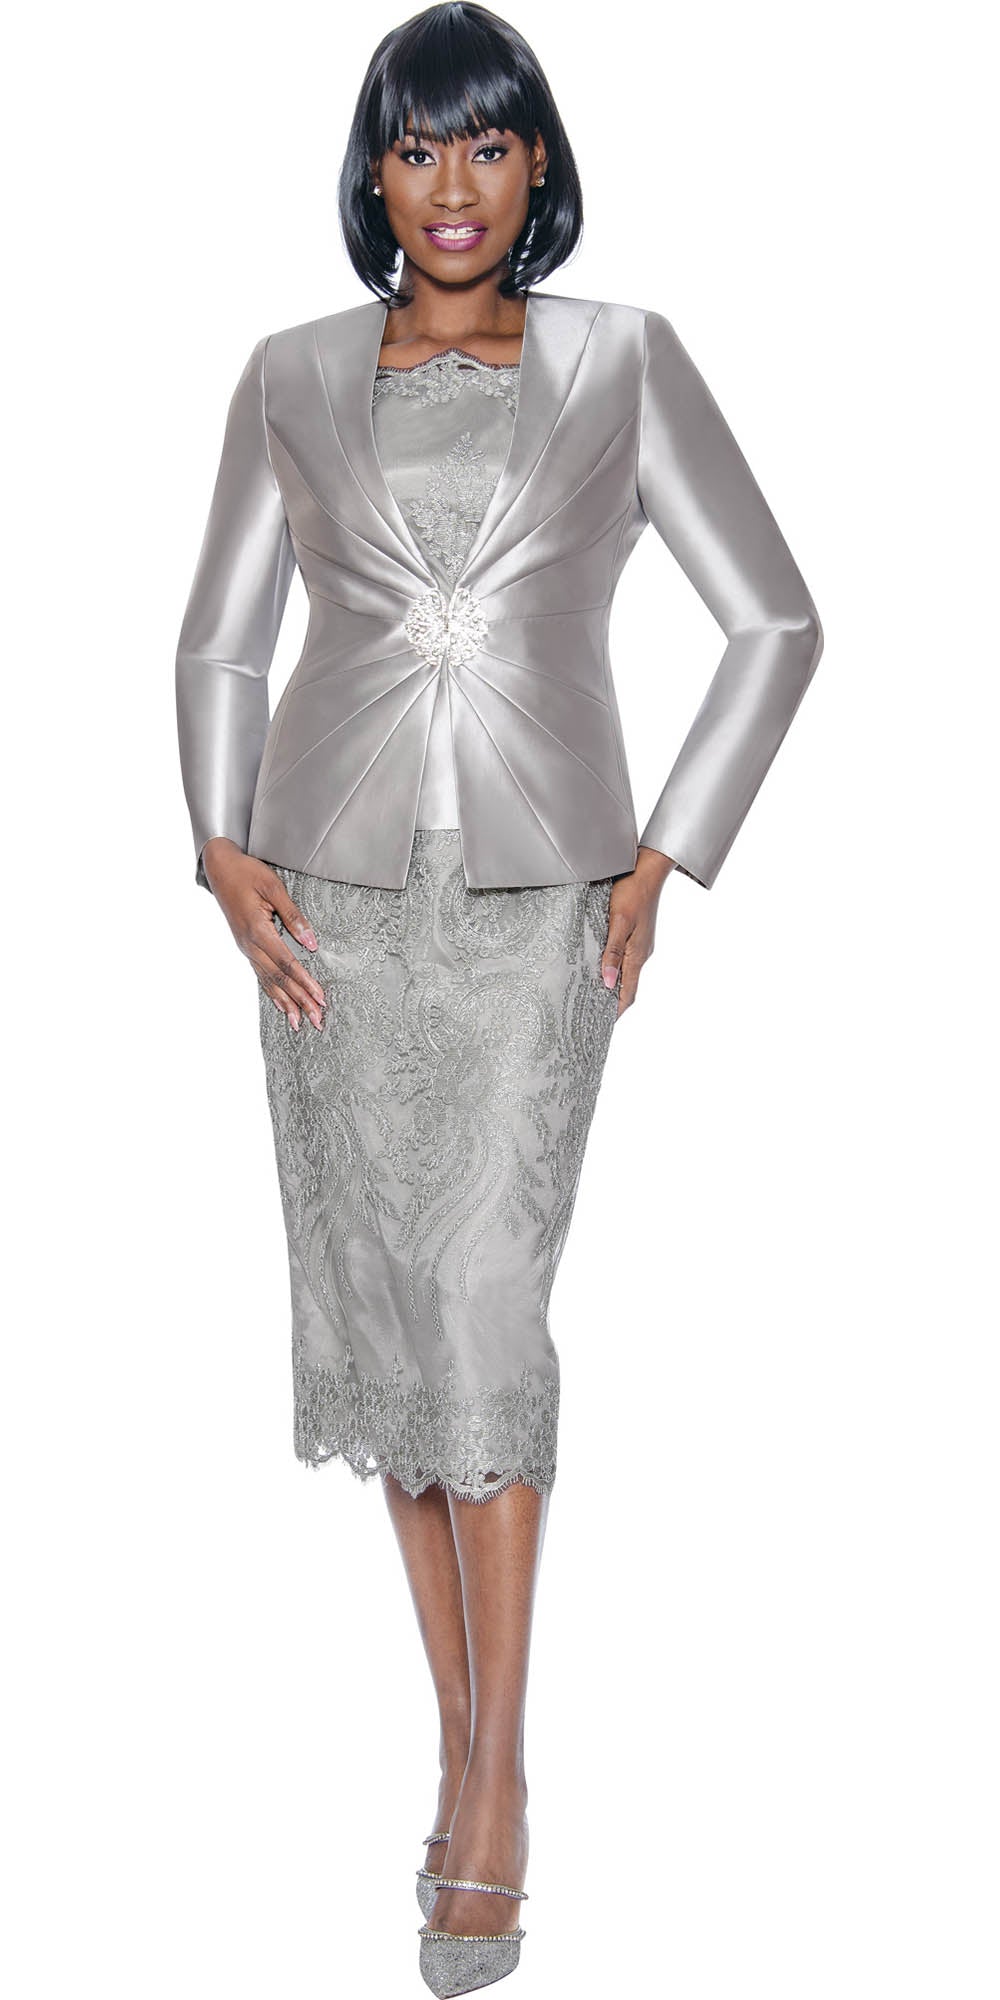 Terramina - 7817 - Silver - Embroidered Lace 3pc Skirt Suit